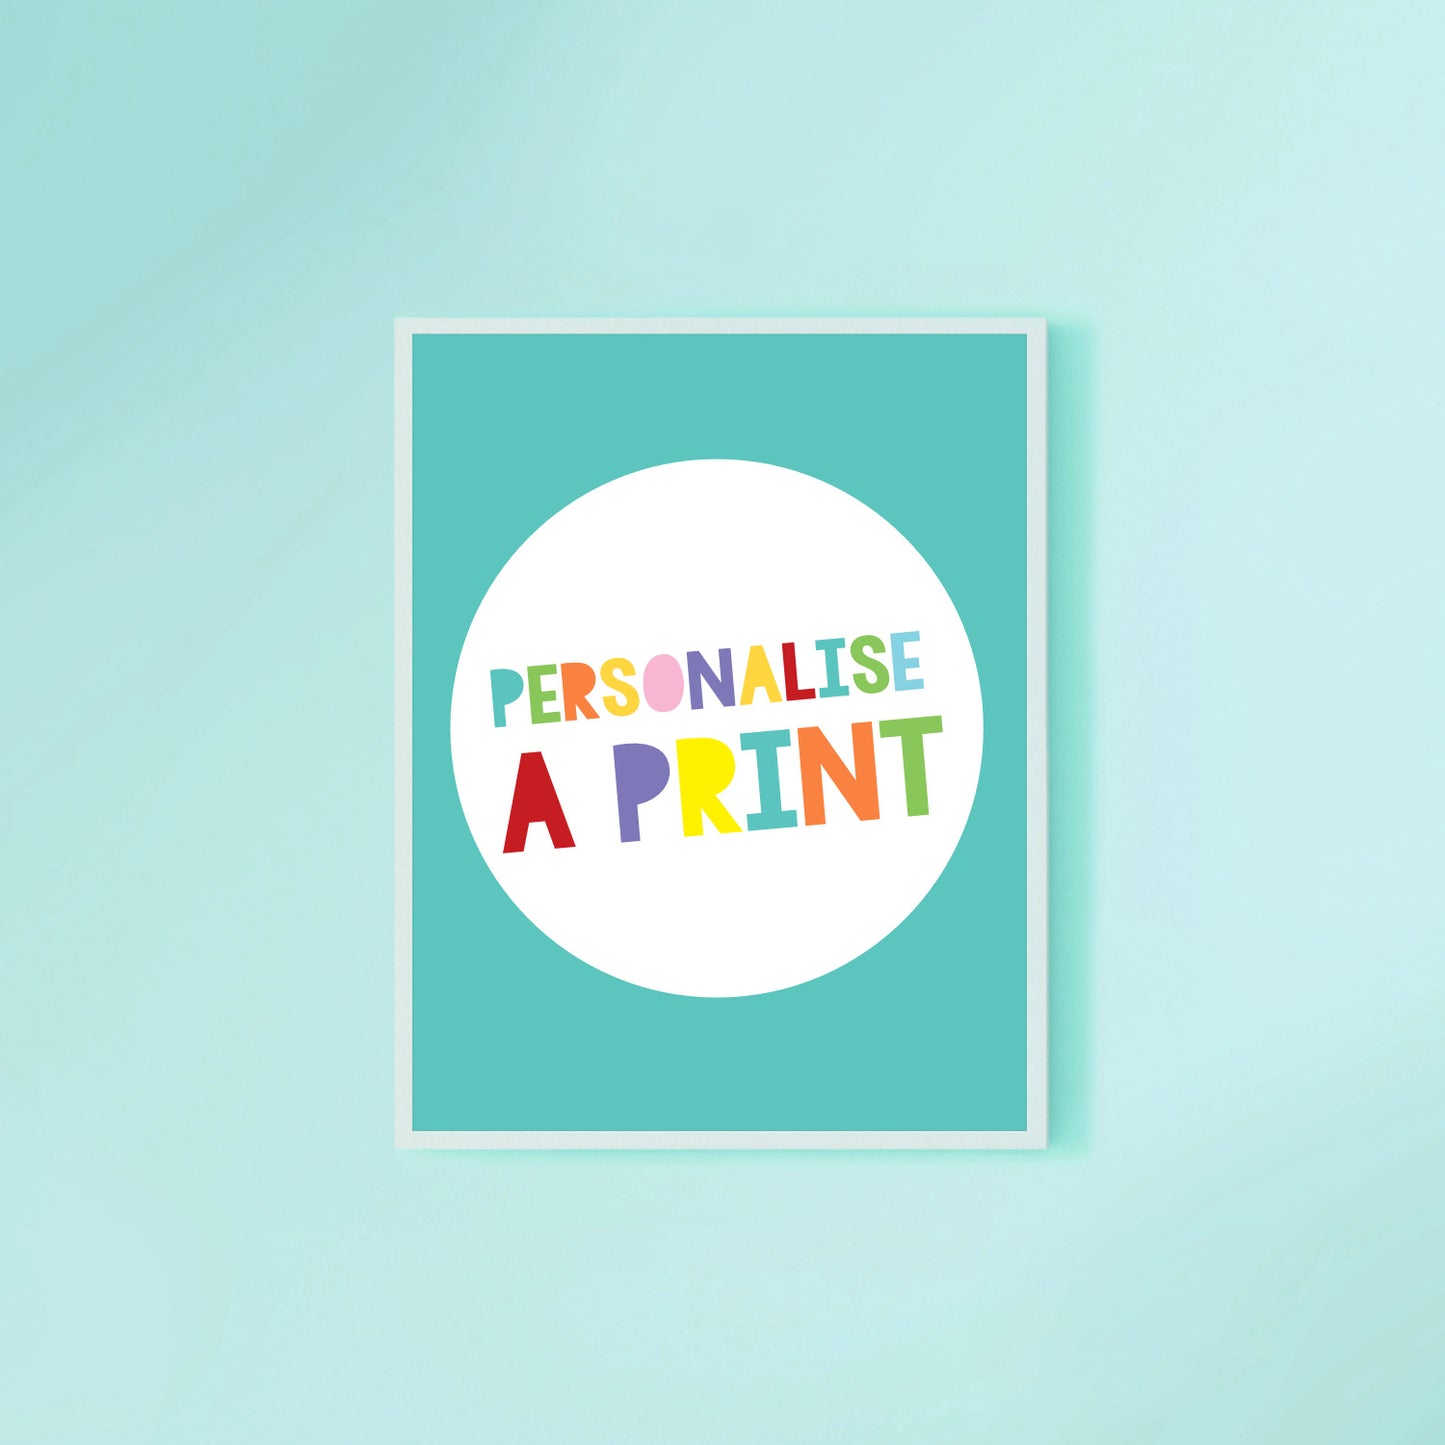 Personalise a print - add on